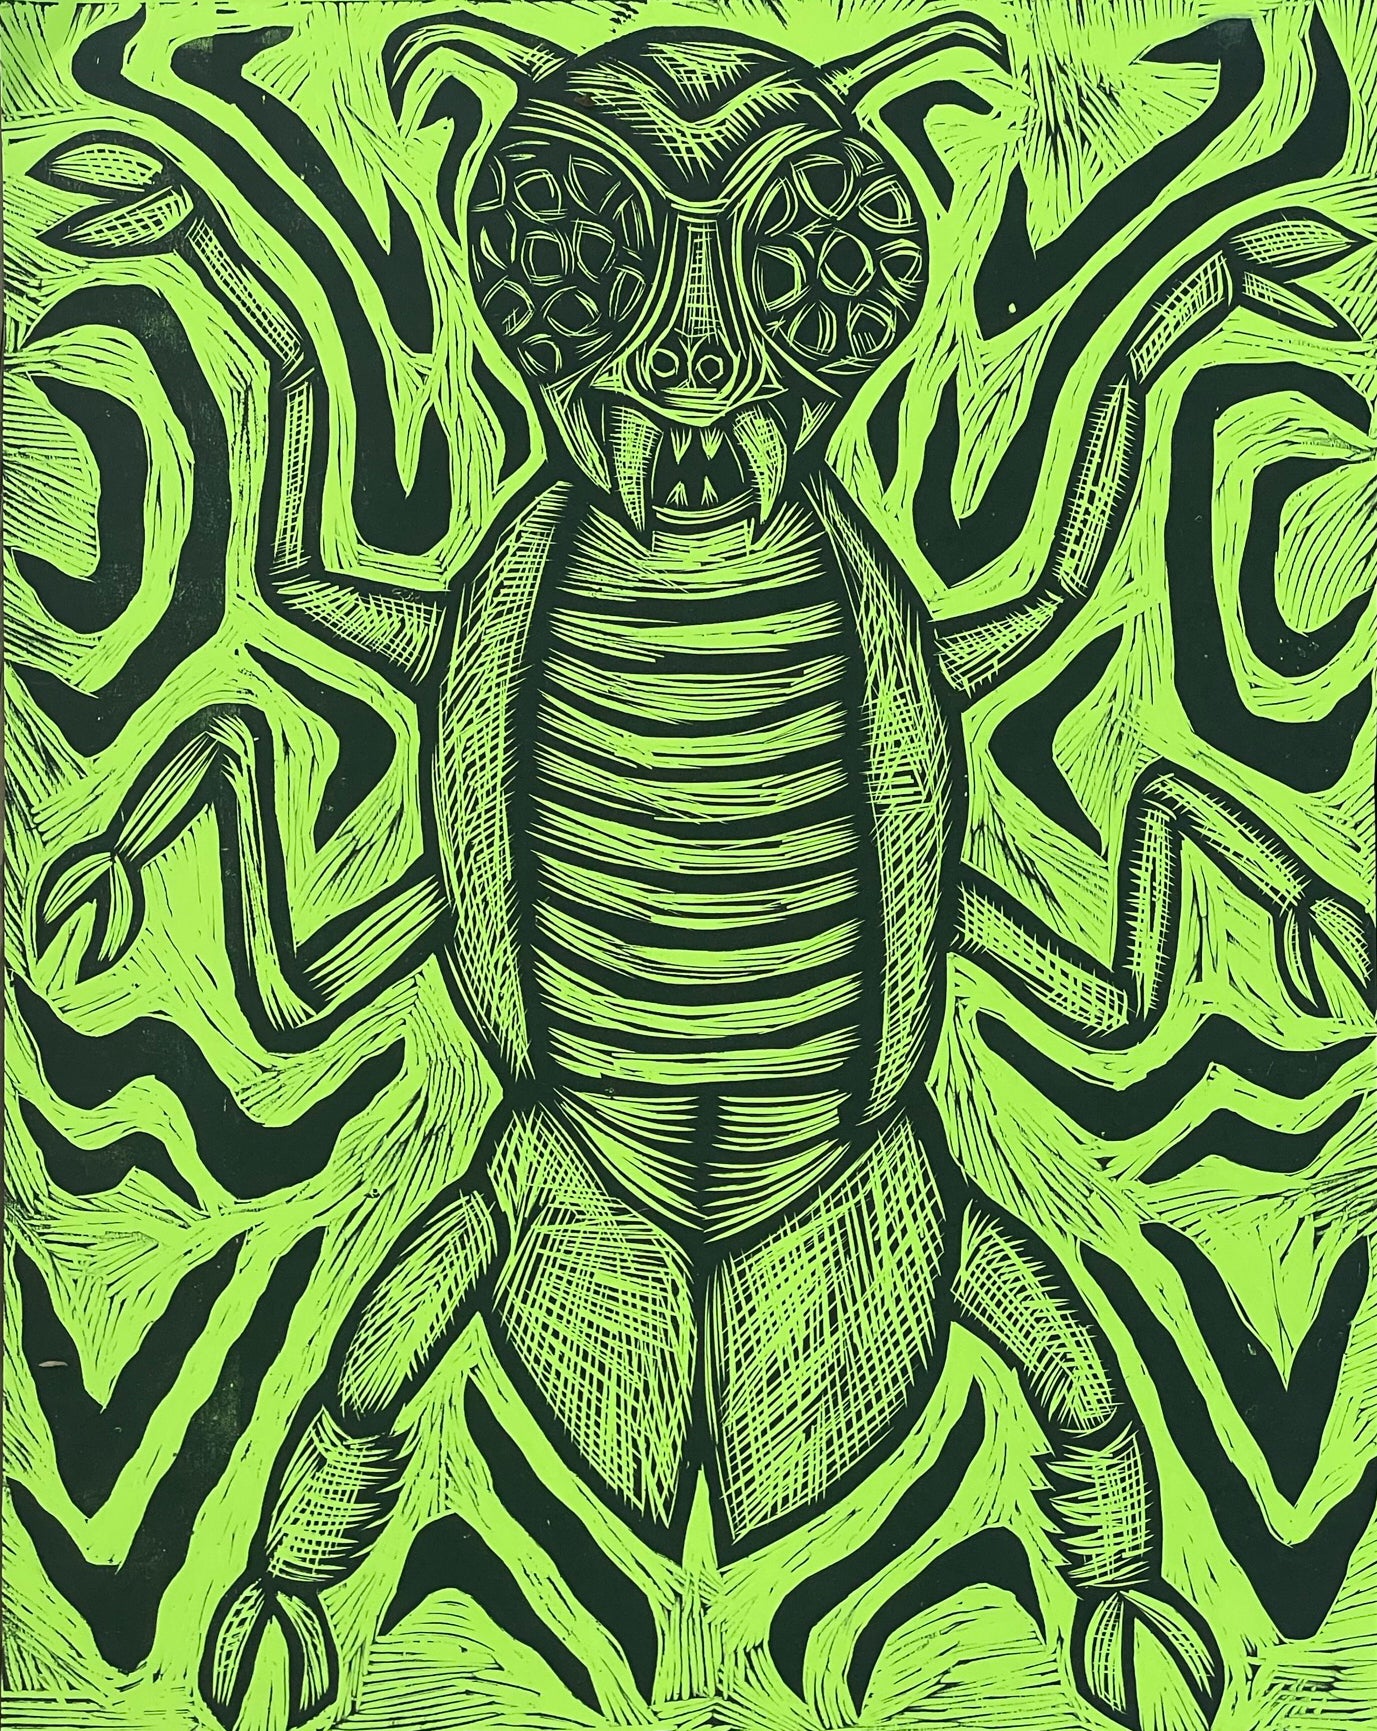 Sinister Ant Woodcut